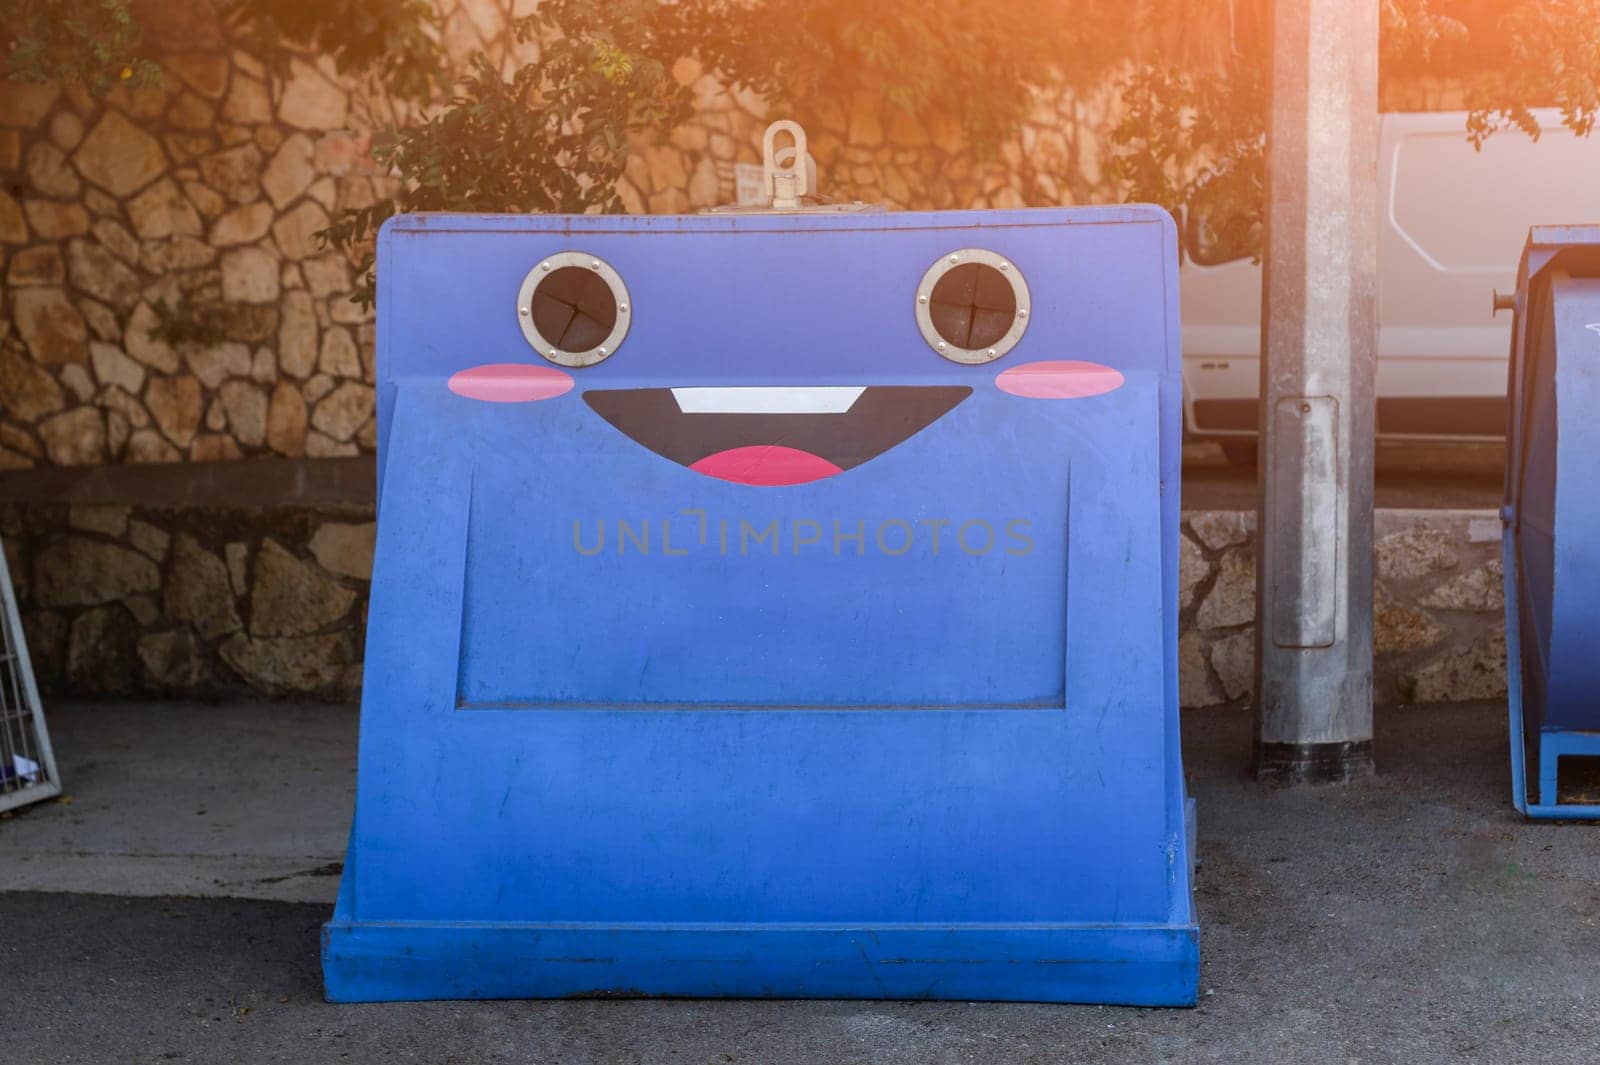 Funny trash can for plastic. Separation of garbage. differentiated garbage collection